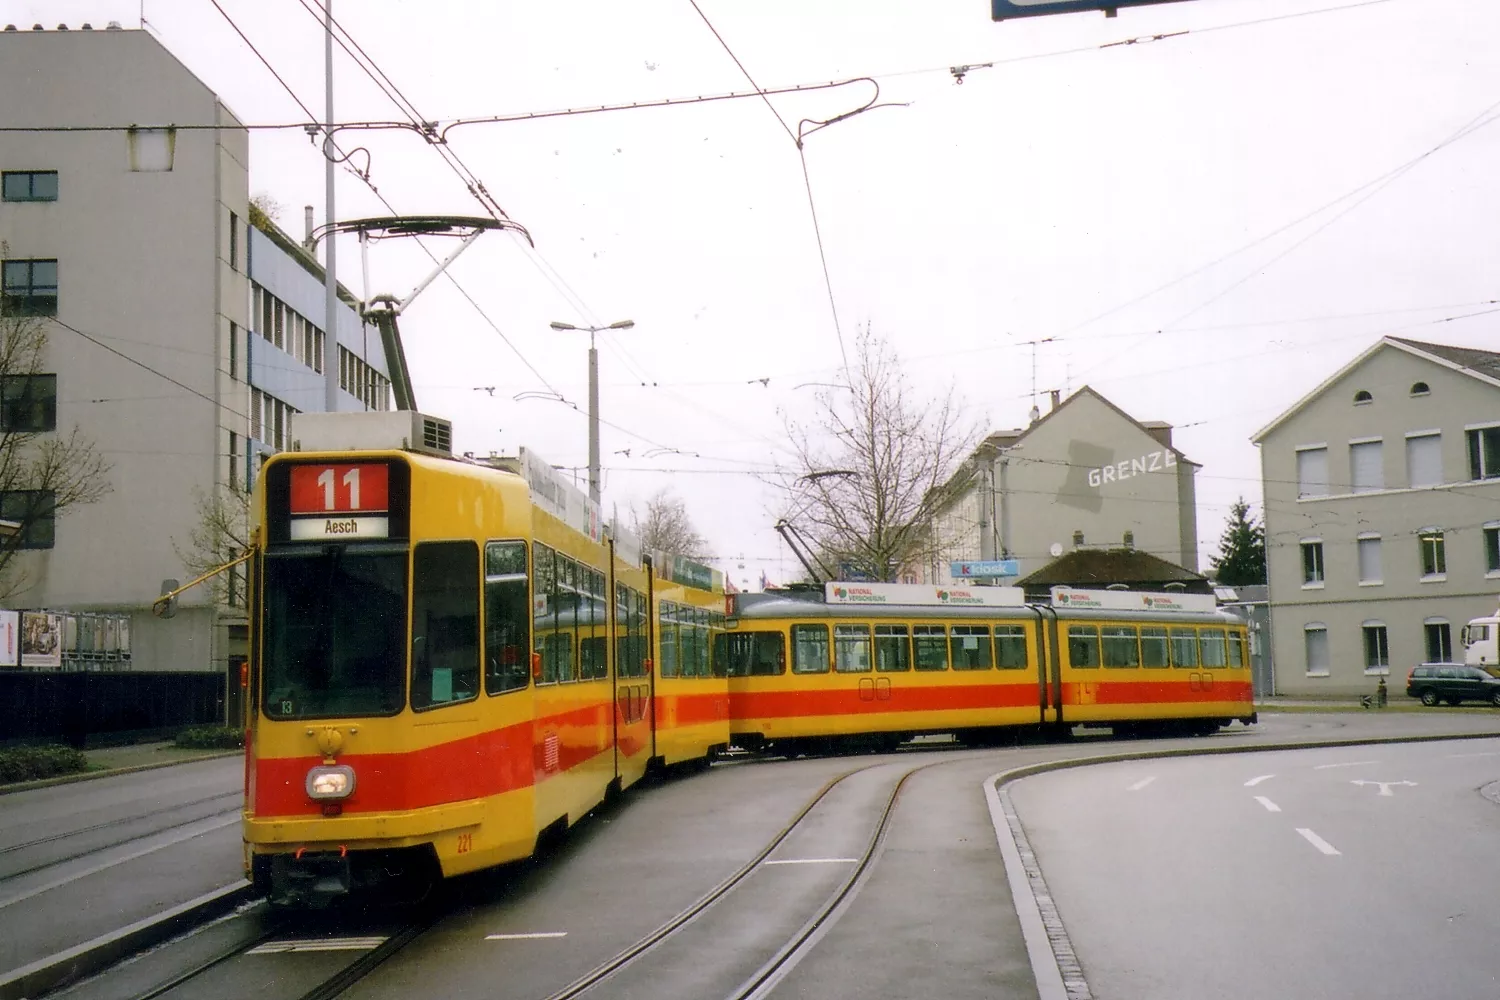 Basel tram line 11 with articulated tram 221 at St.Louis Grenze